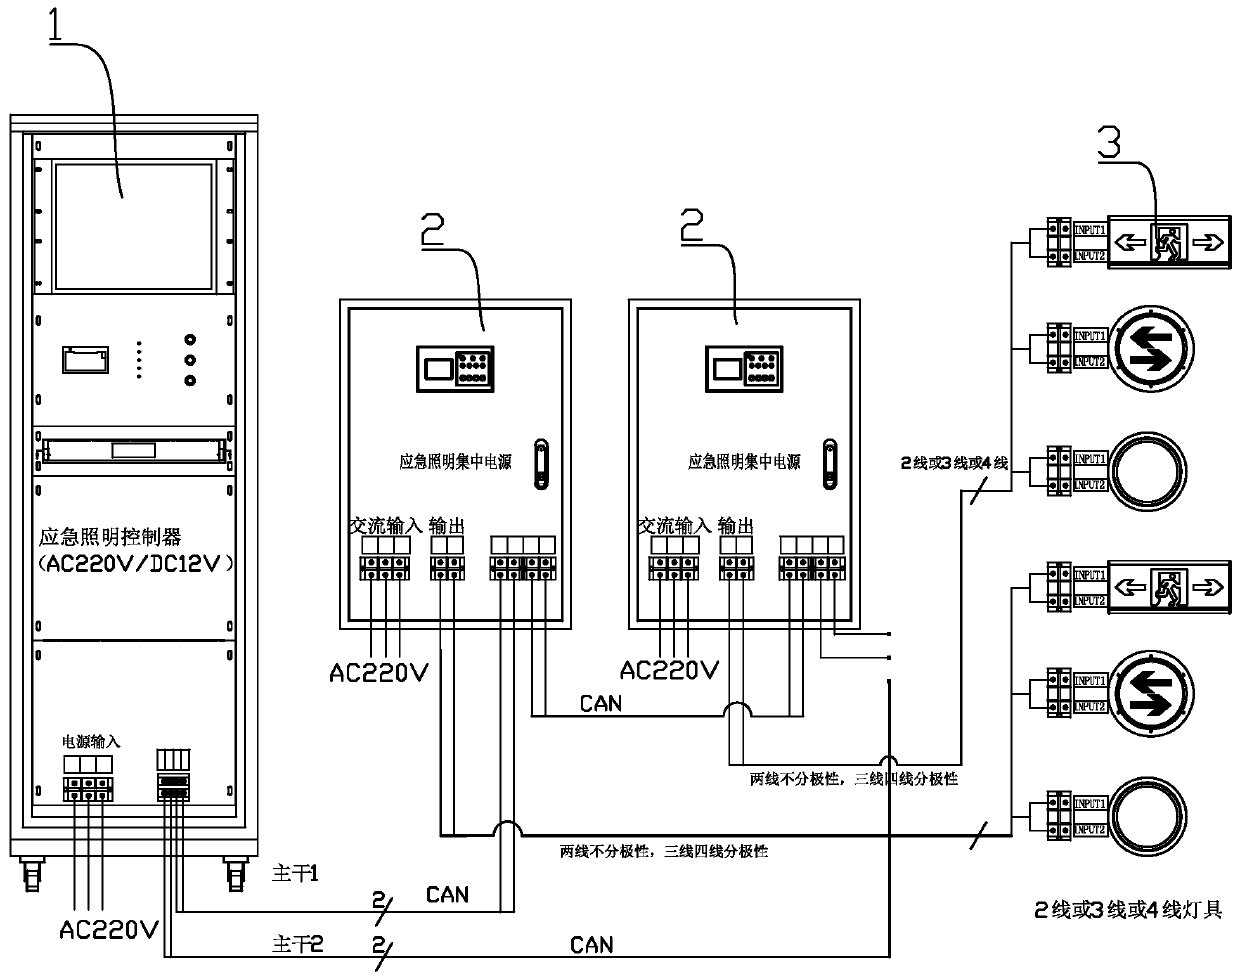 A control assembly of centralized power supply for emergency lighting